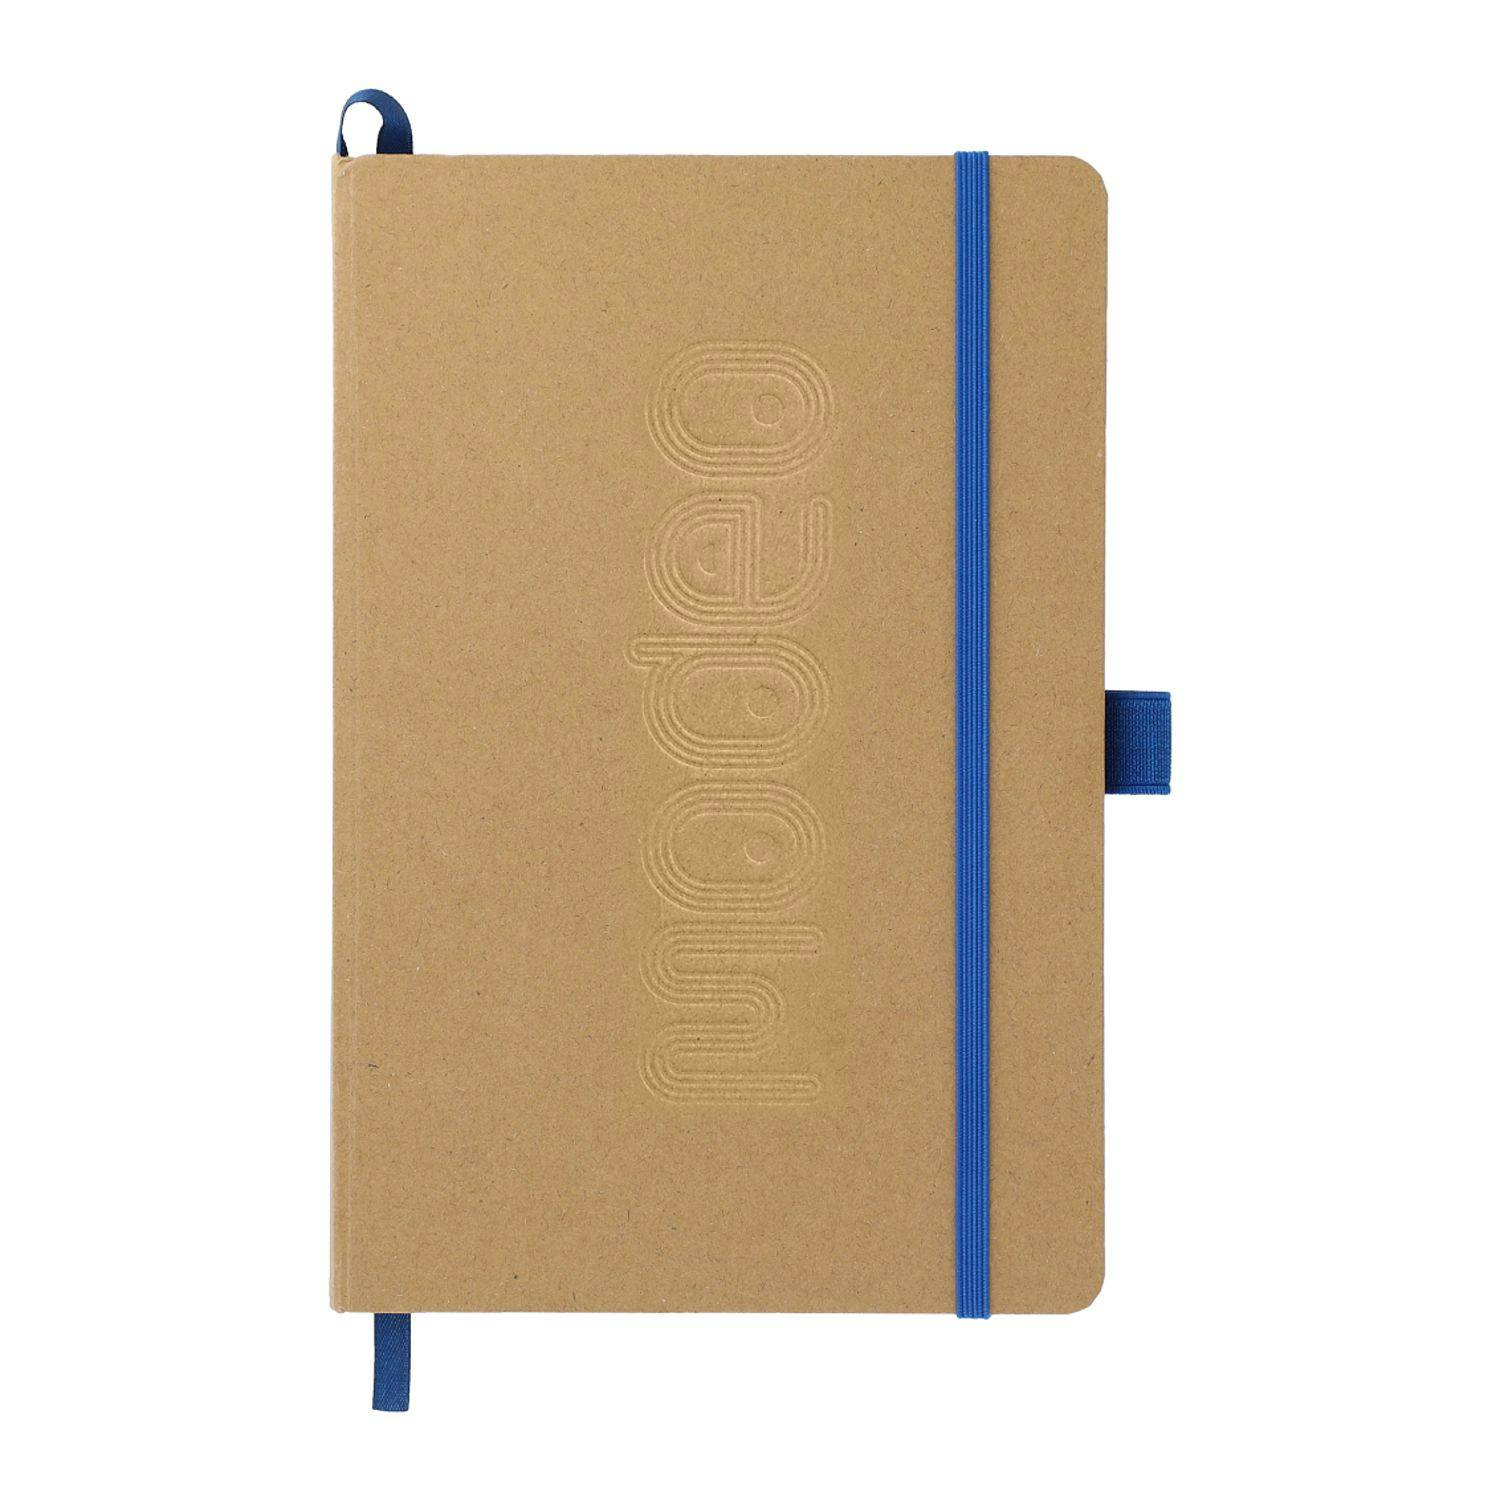 5.5" x 8.5" Eco Color Bound JournalBook® - additional Image 1